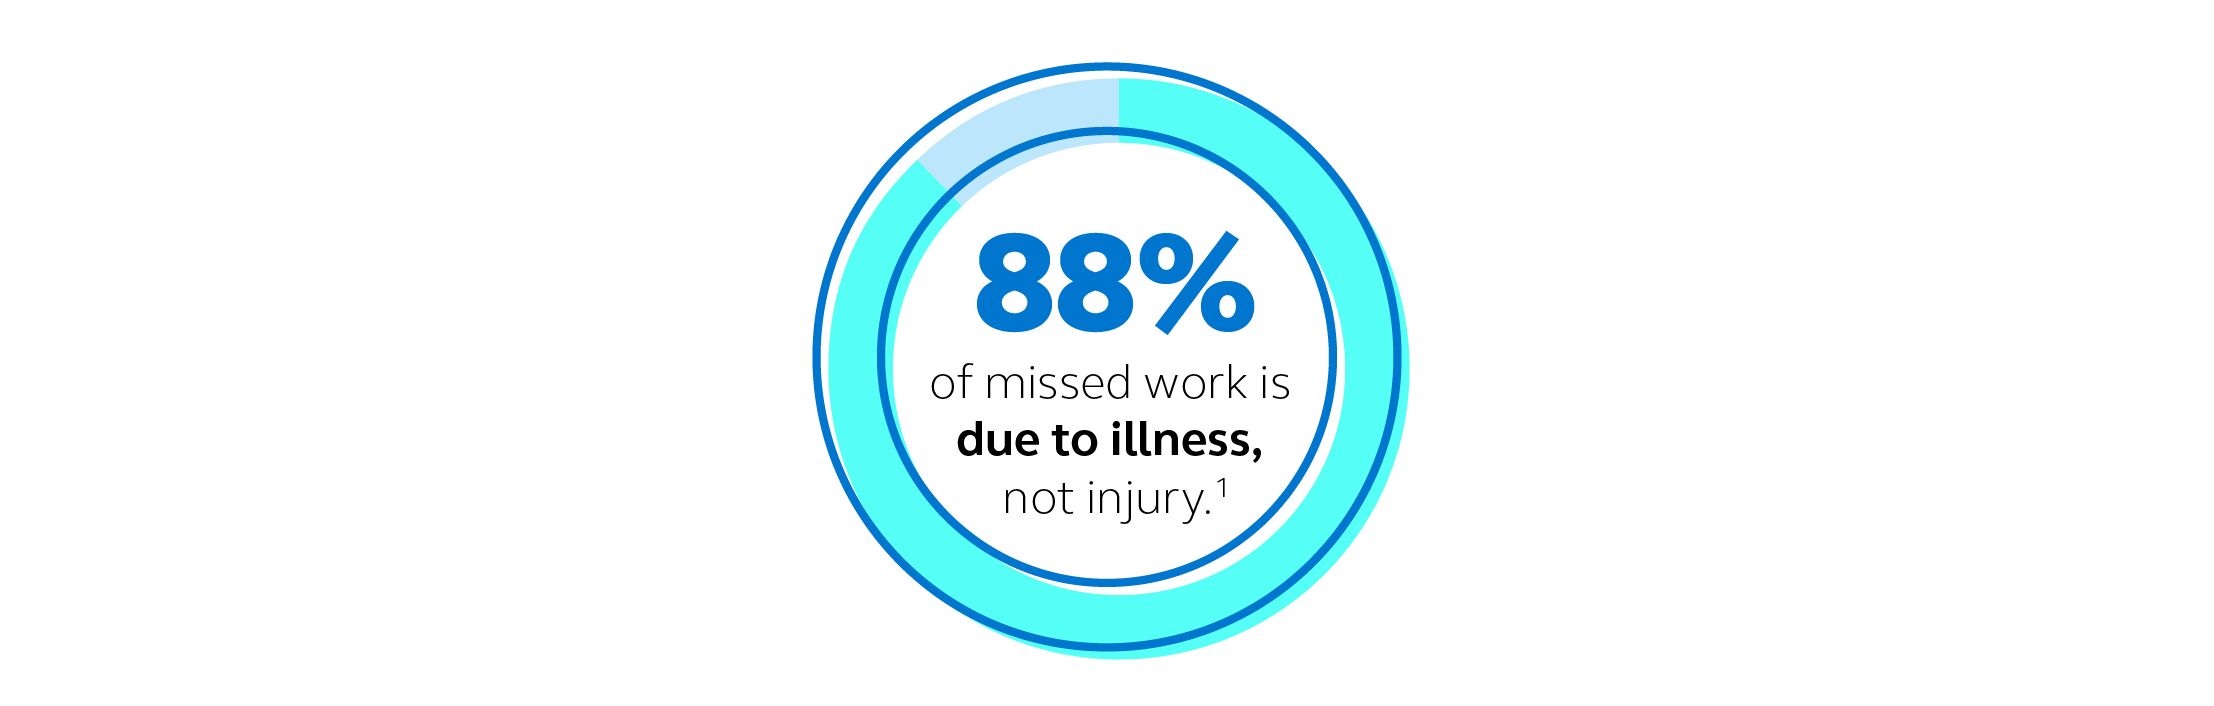 Infographic showing that 88% of missed work is due to illness, not injury.